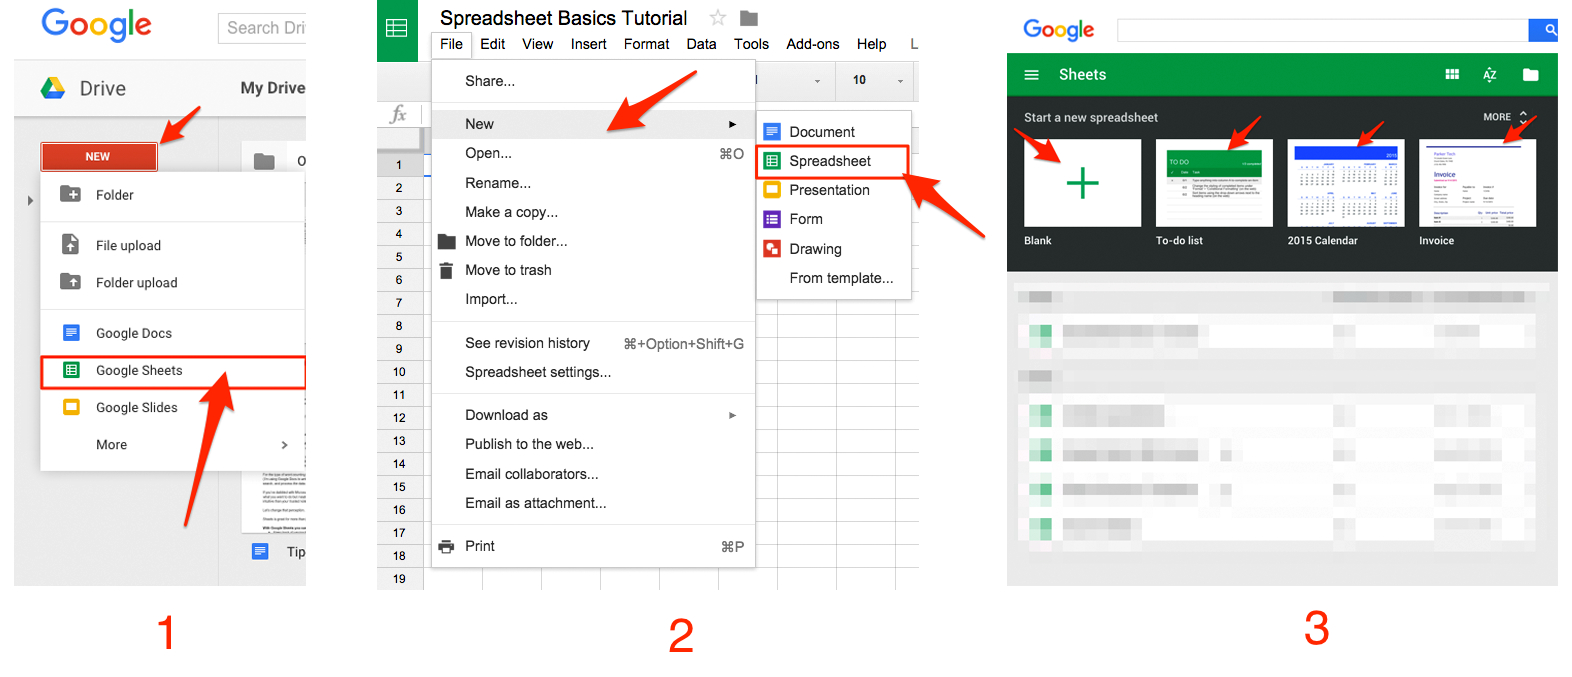 Features Of Spreadsheet Software For Google Sheets 101: The Beginner's Guide To Online Spreadsheets  The